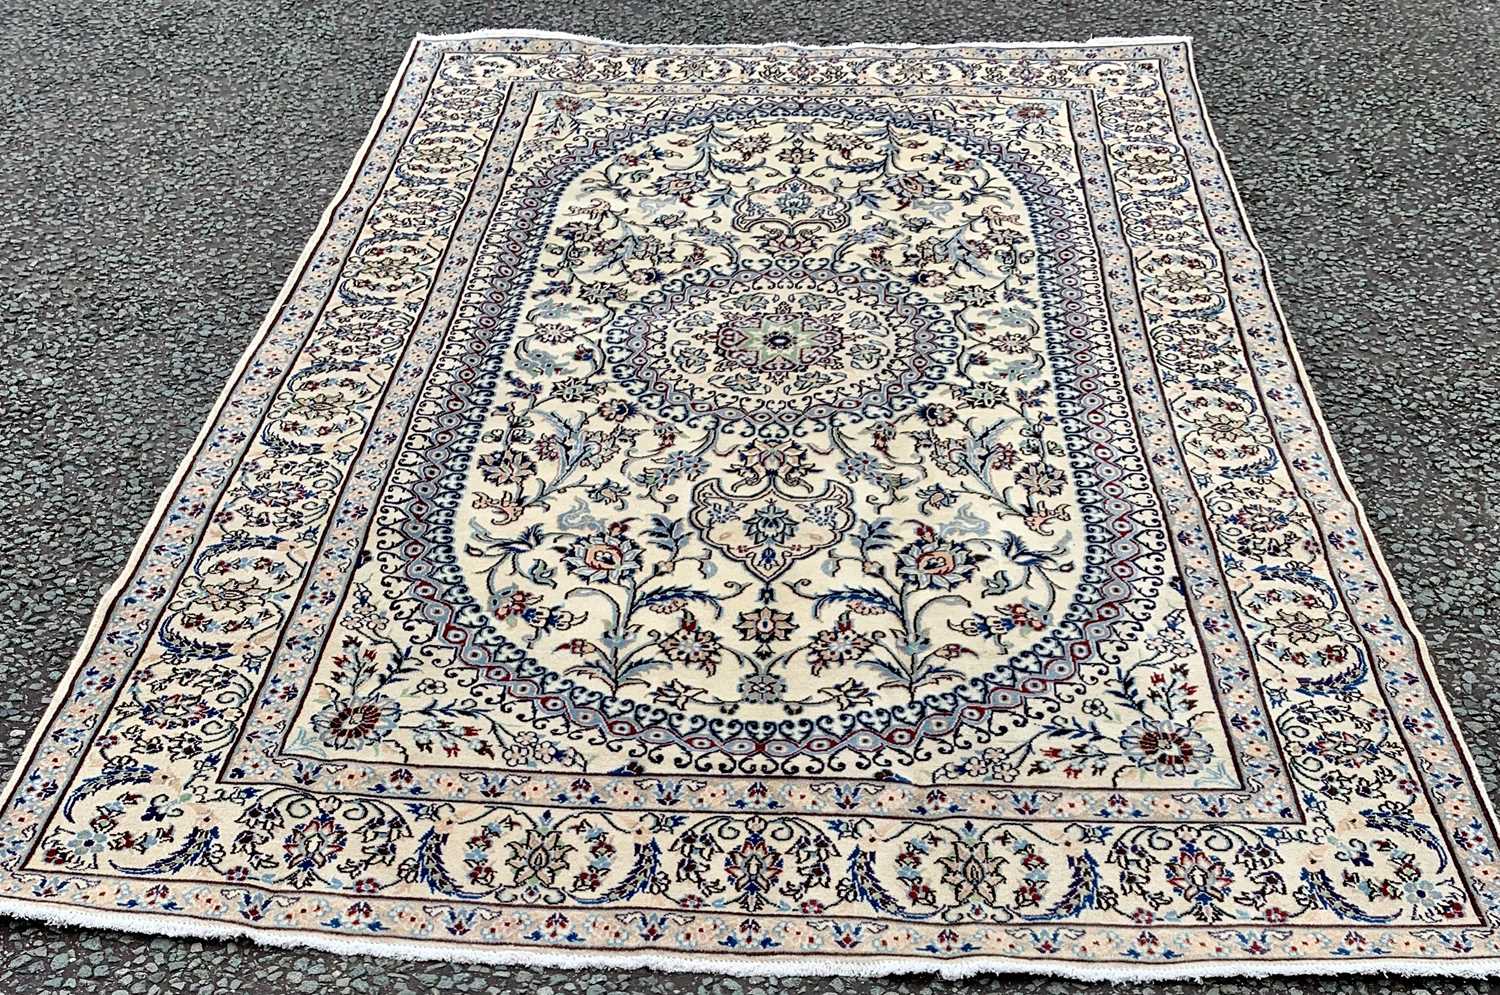 FINE NAIN RUG, cream ground with extensive floral pattern, the central block having a traditional